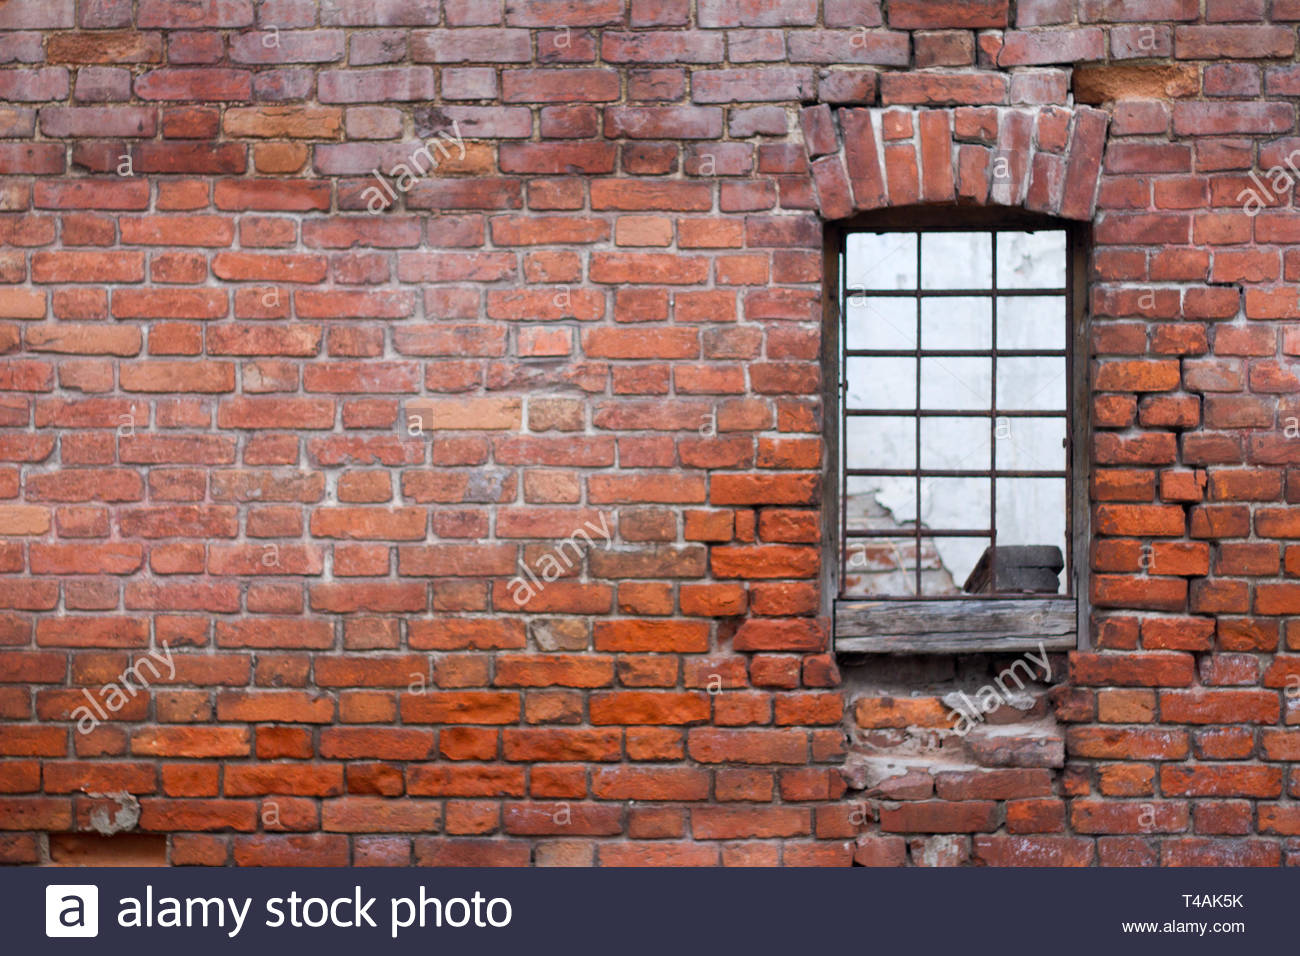 Window With Bars On The Background Of Brick Wall Old